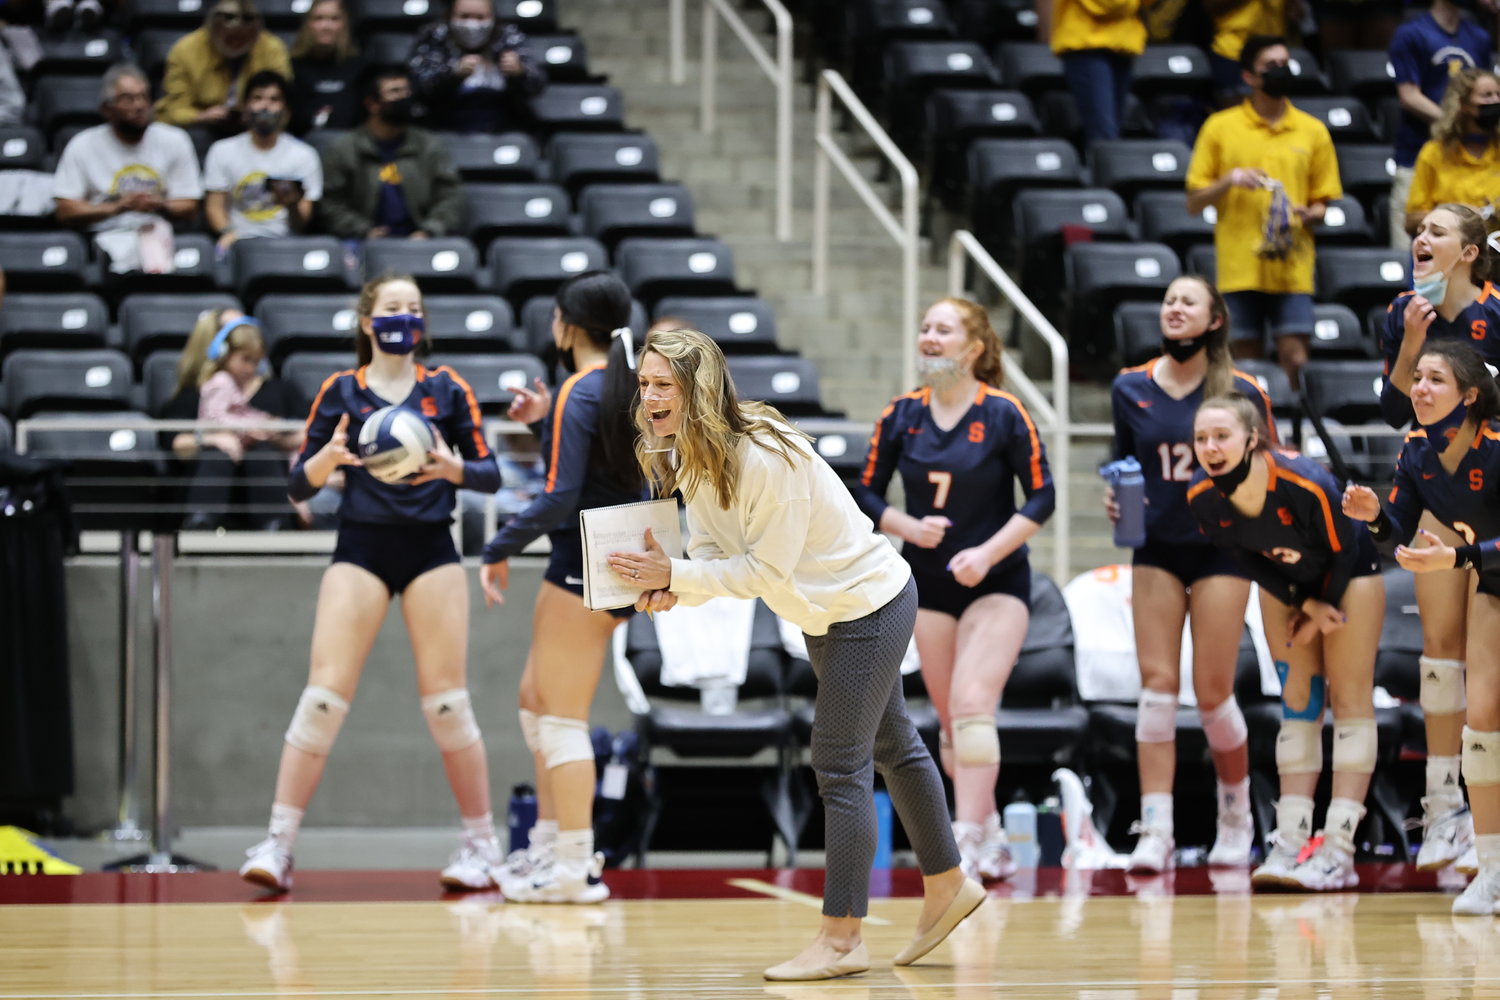 Seven Lakes coach Amy Cataline cheers on her players during the team's Class 6A state final game against Klein on Dec. 12 at the Culwell Center in Garland.